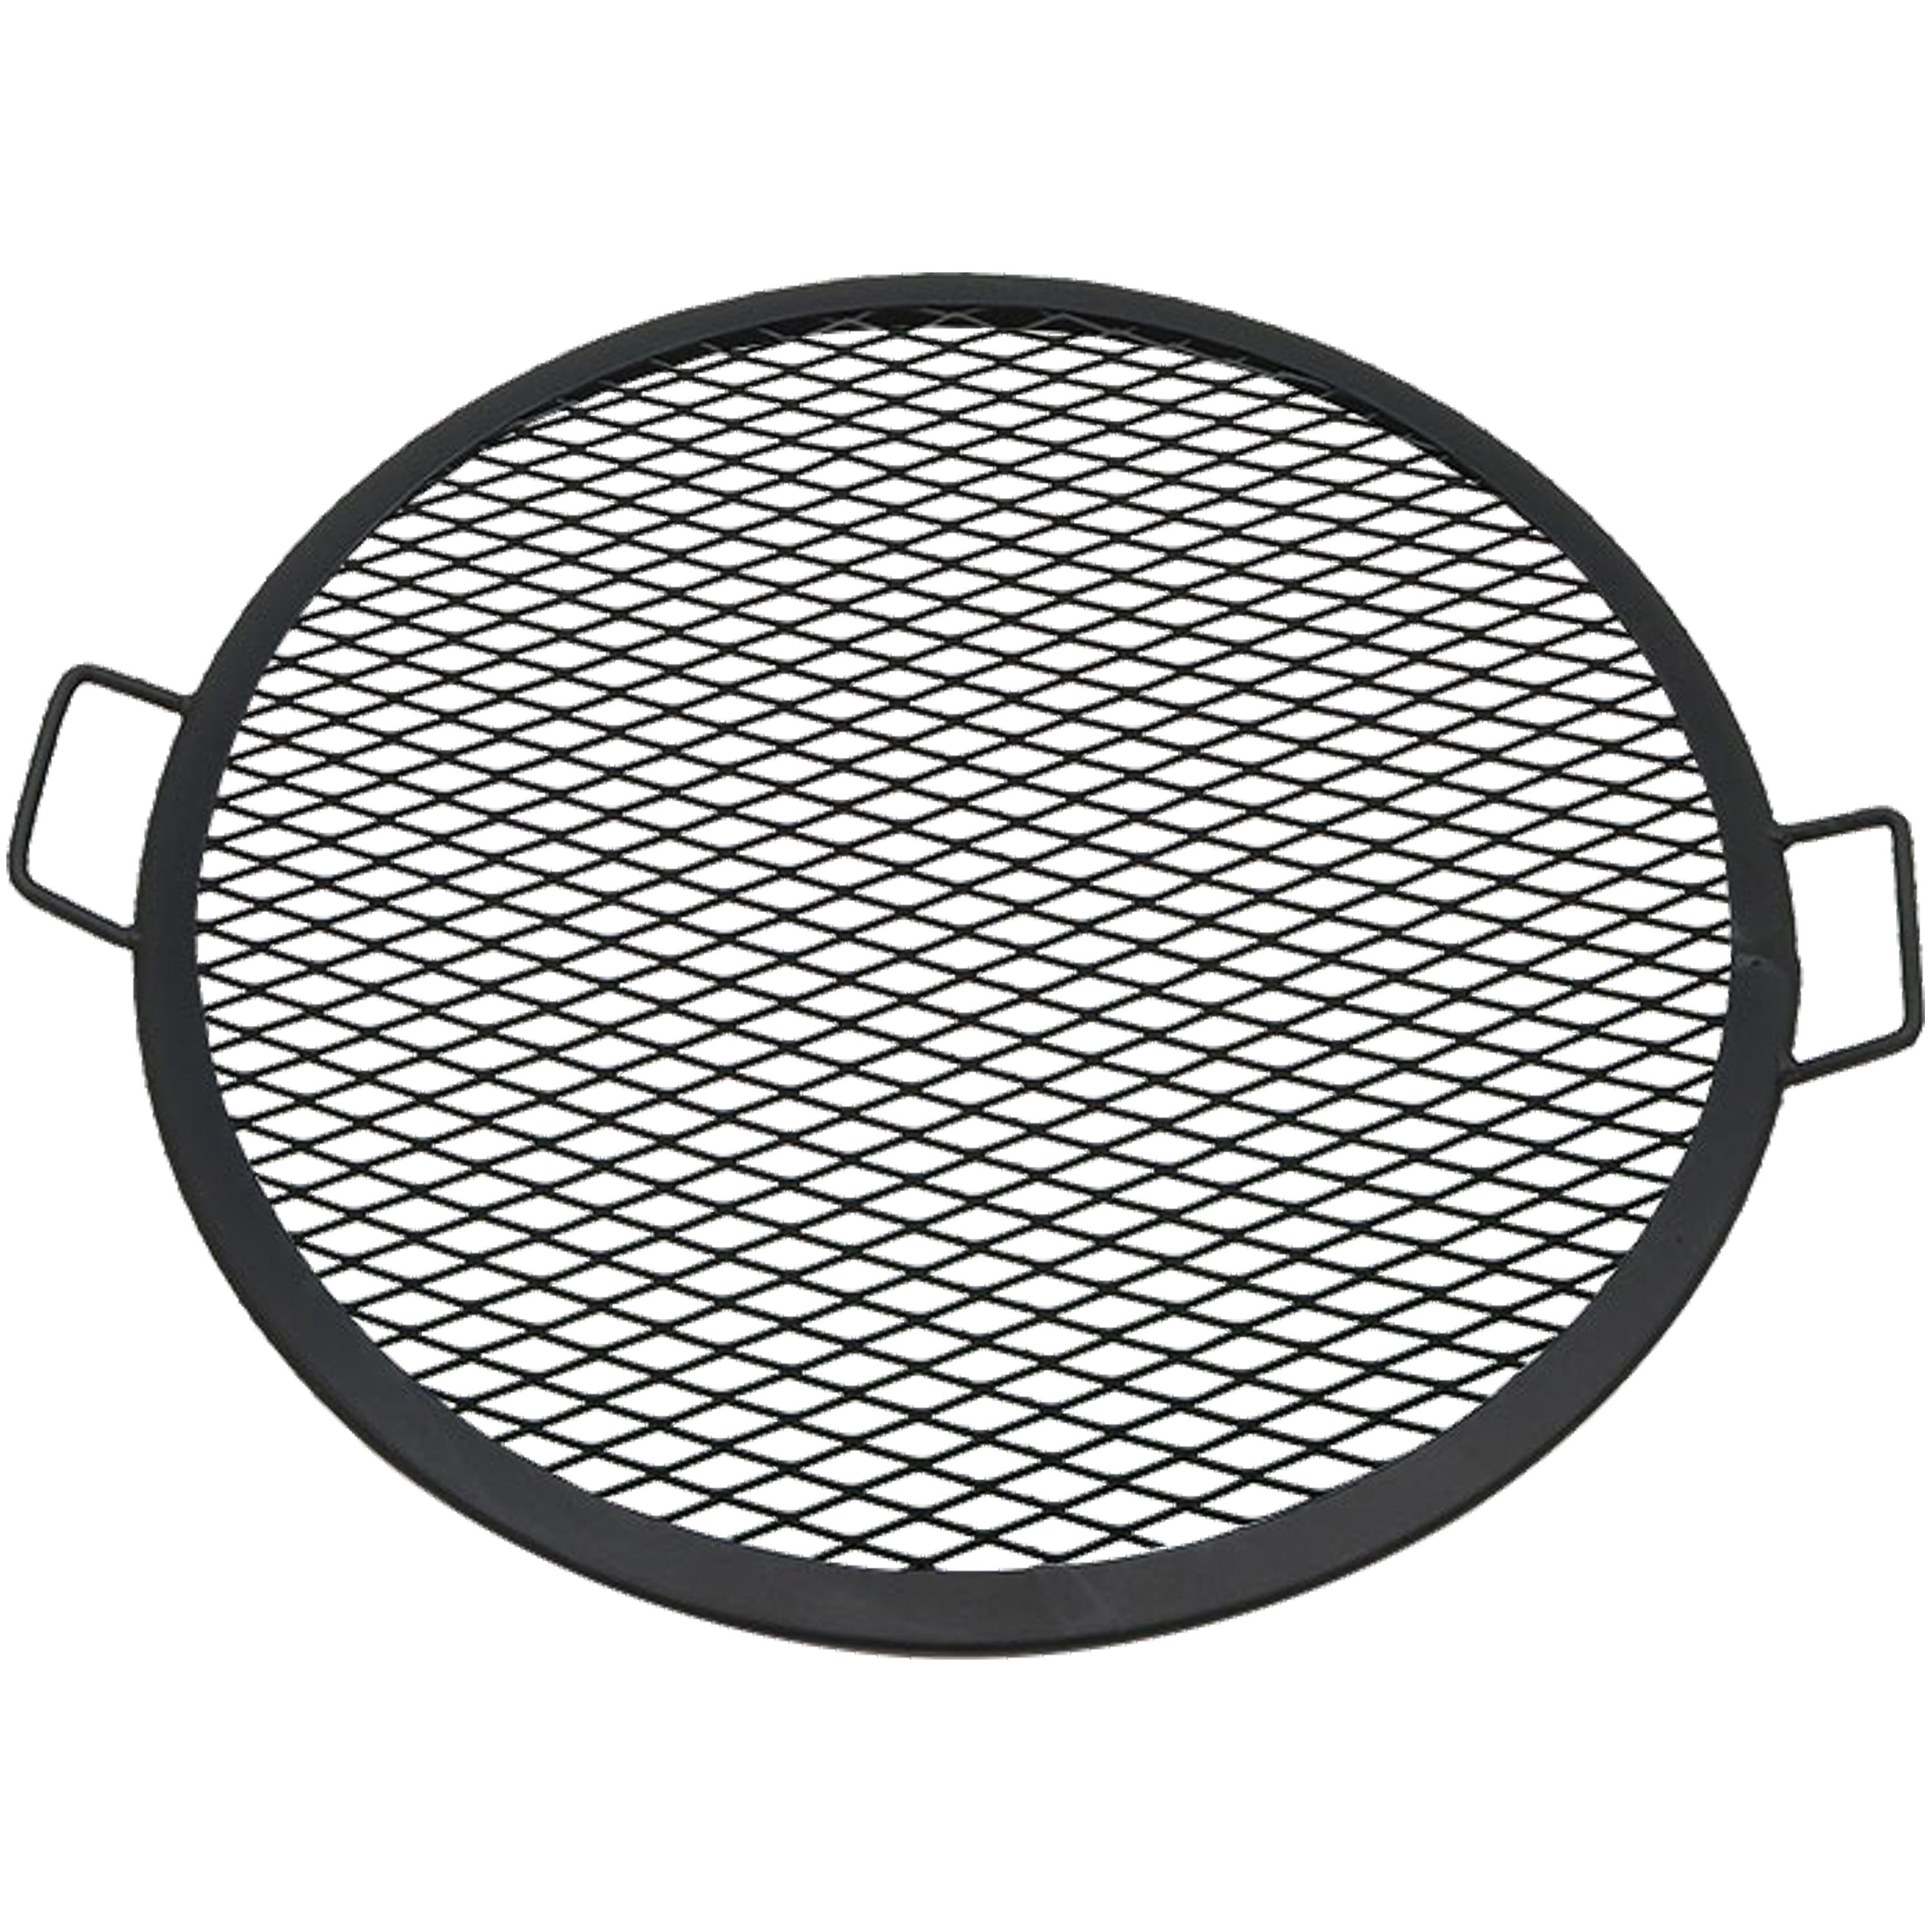 Fire Pit Grill Cooking Grate, Round Fire Pit Grill Grate